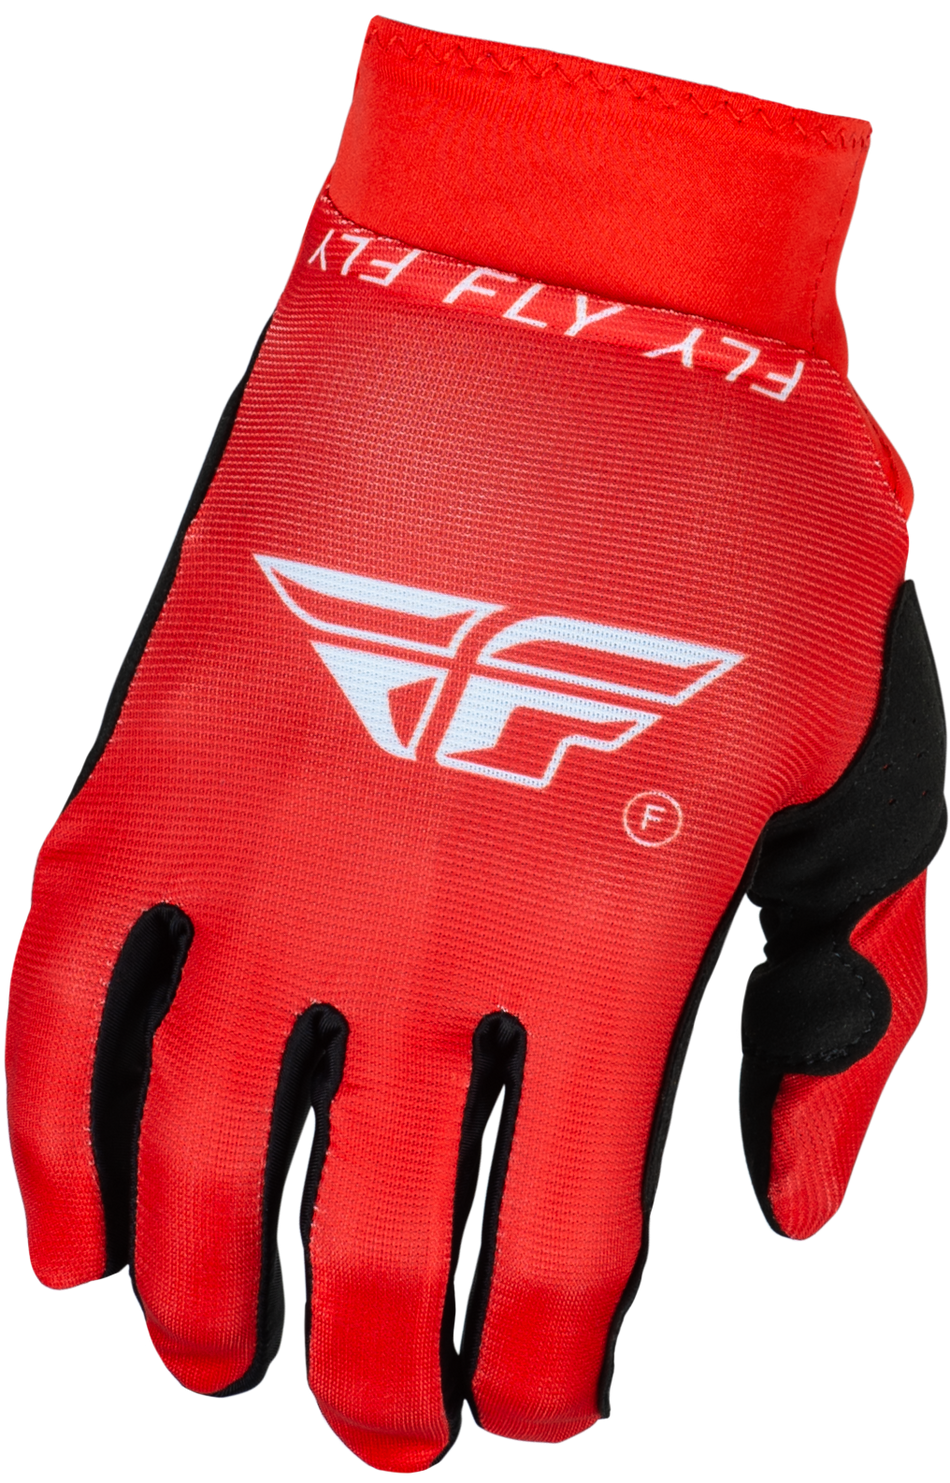 FLY RACING Youth Pro Lite Gloves Red/White Yl 377-044YL